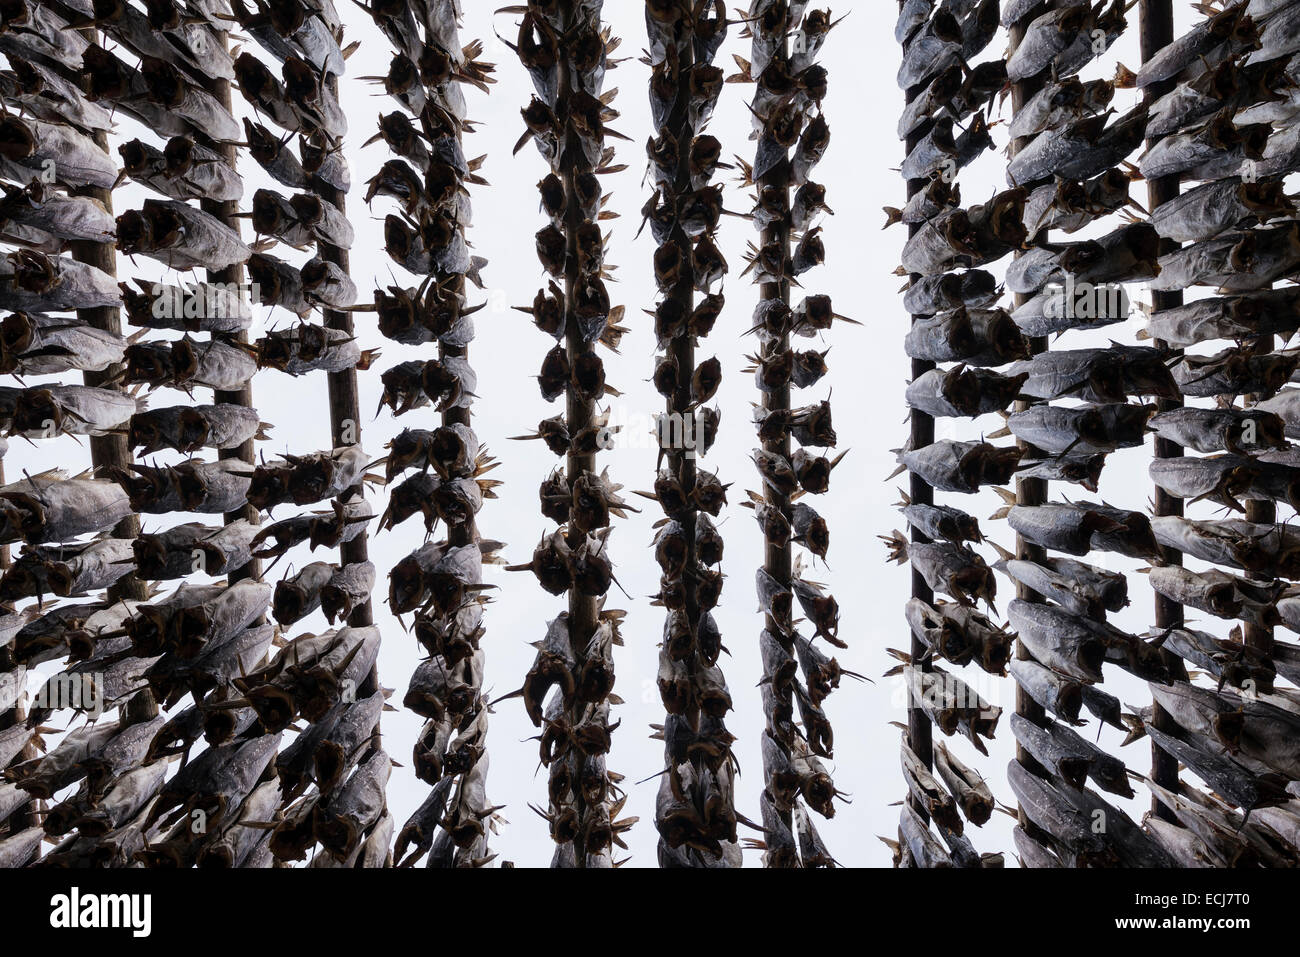 Rows of cod stockfish hang to dry in winter air, Lofoten Islands, Norway Stock Photo